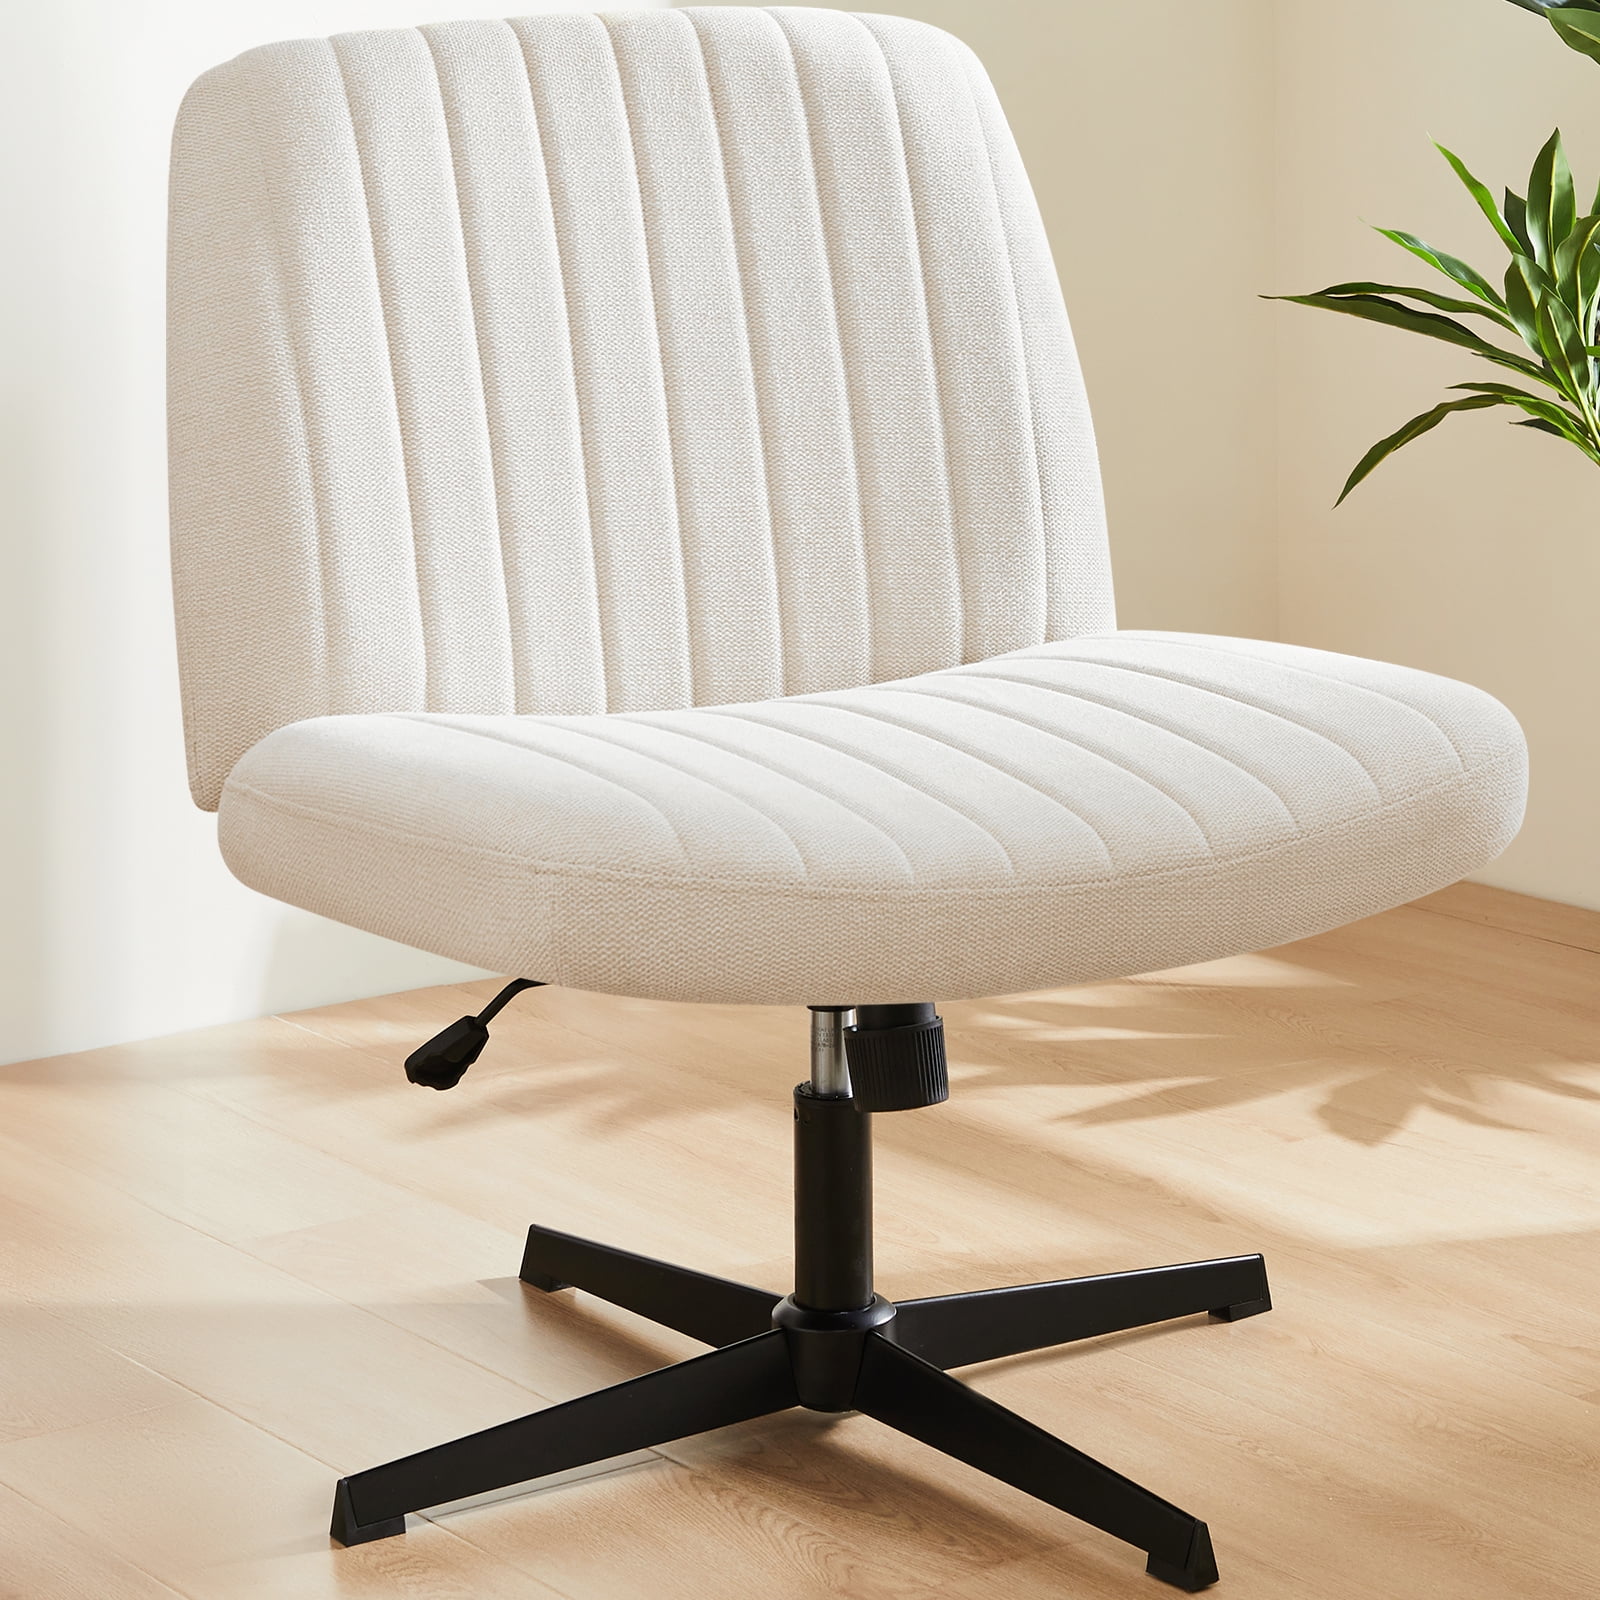 Office Chair Armless Criss Cross Legged Chair No Wheels, Comfy Home Office Desk Chairs, Adjustable Swivel Padded Fabric Vanity Task Computer Chair - image 1 of 14